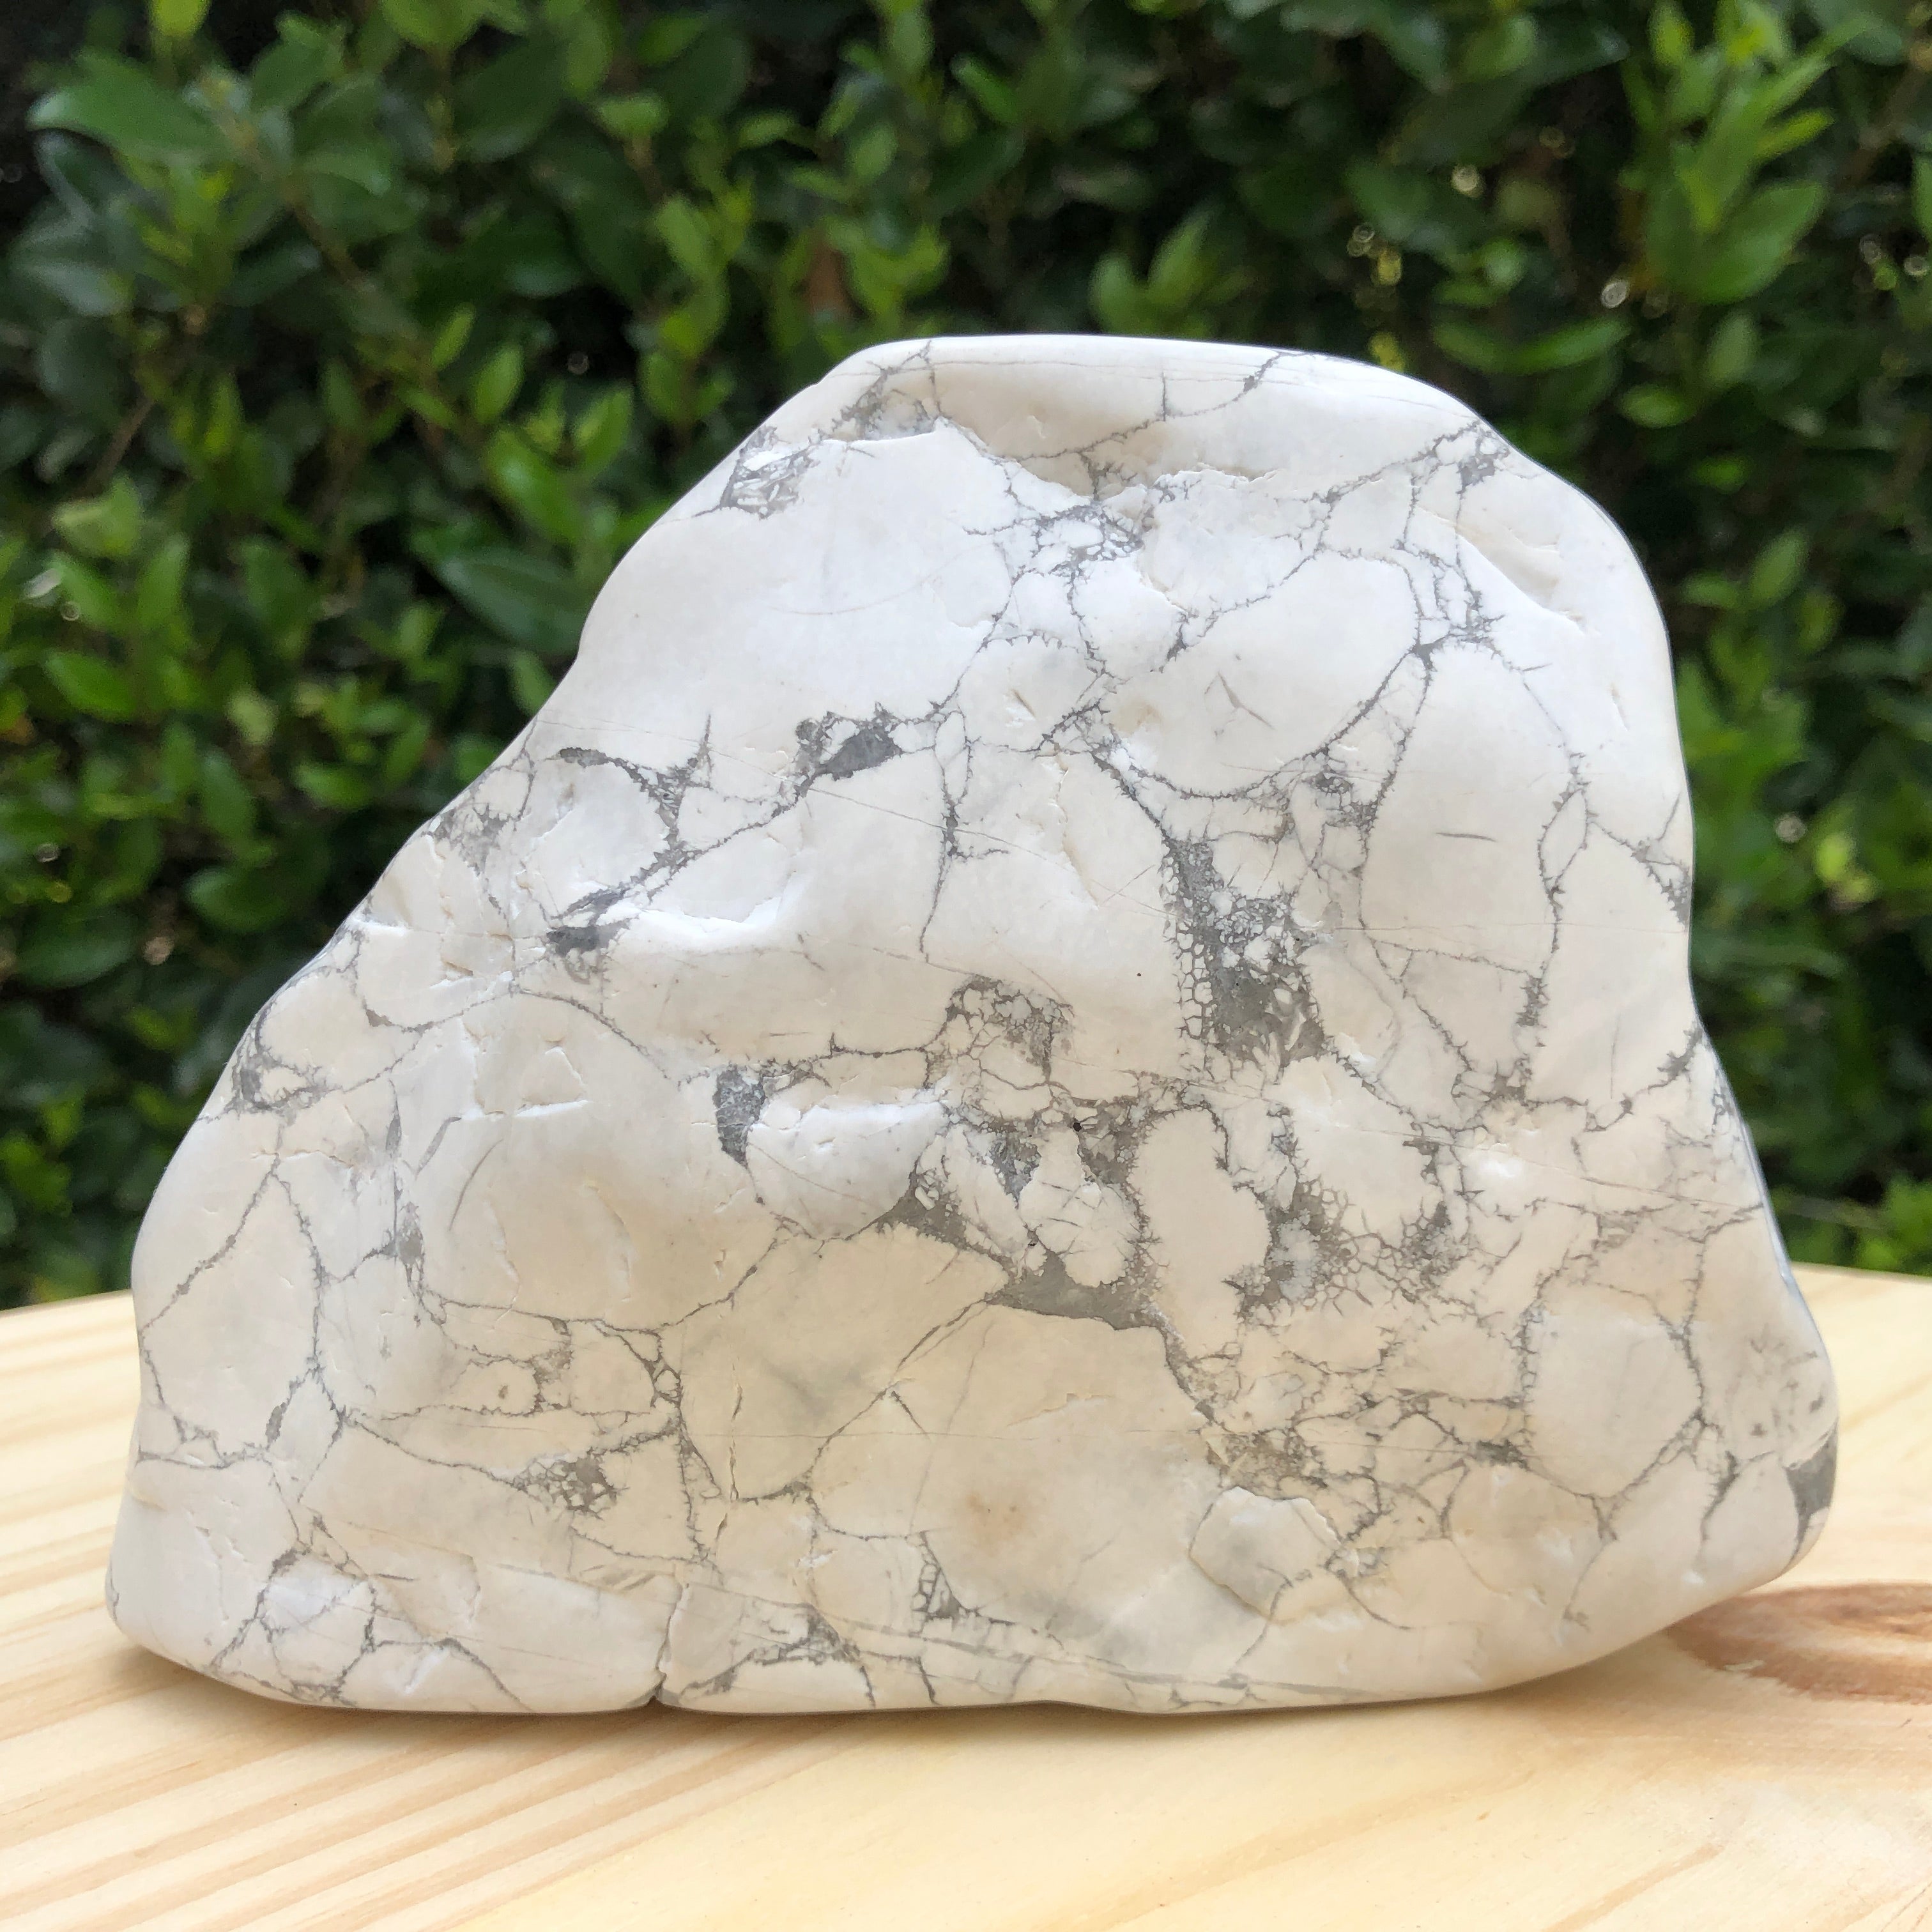 2.083kg 13x13x13cm White Howlite Polished from United States